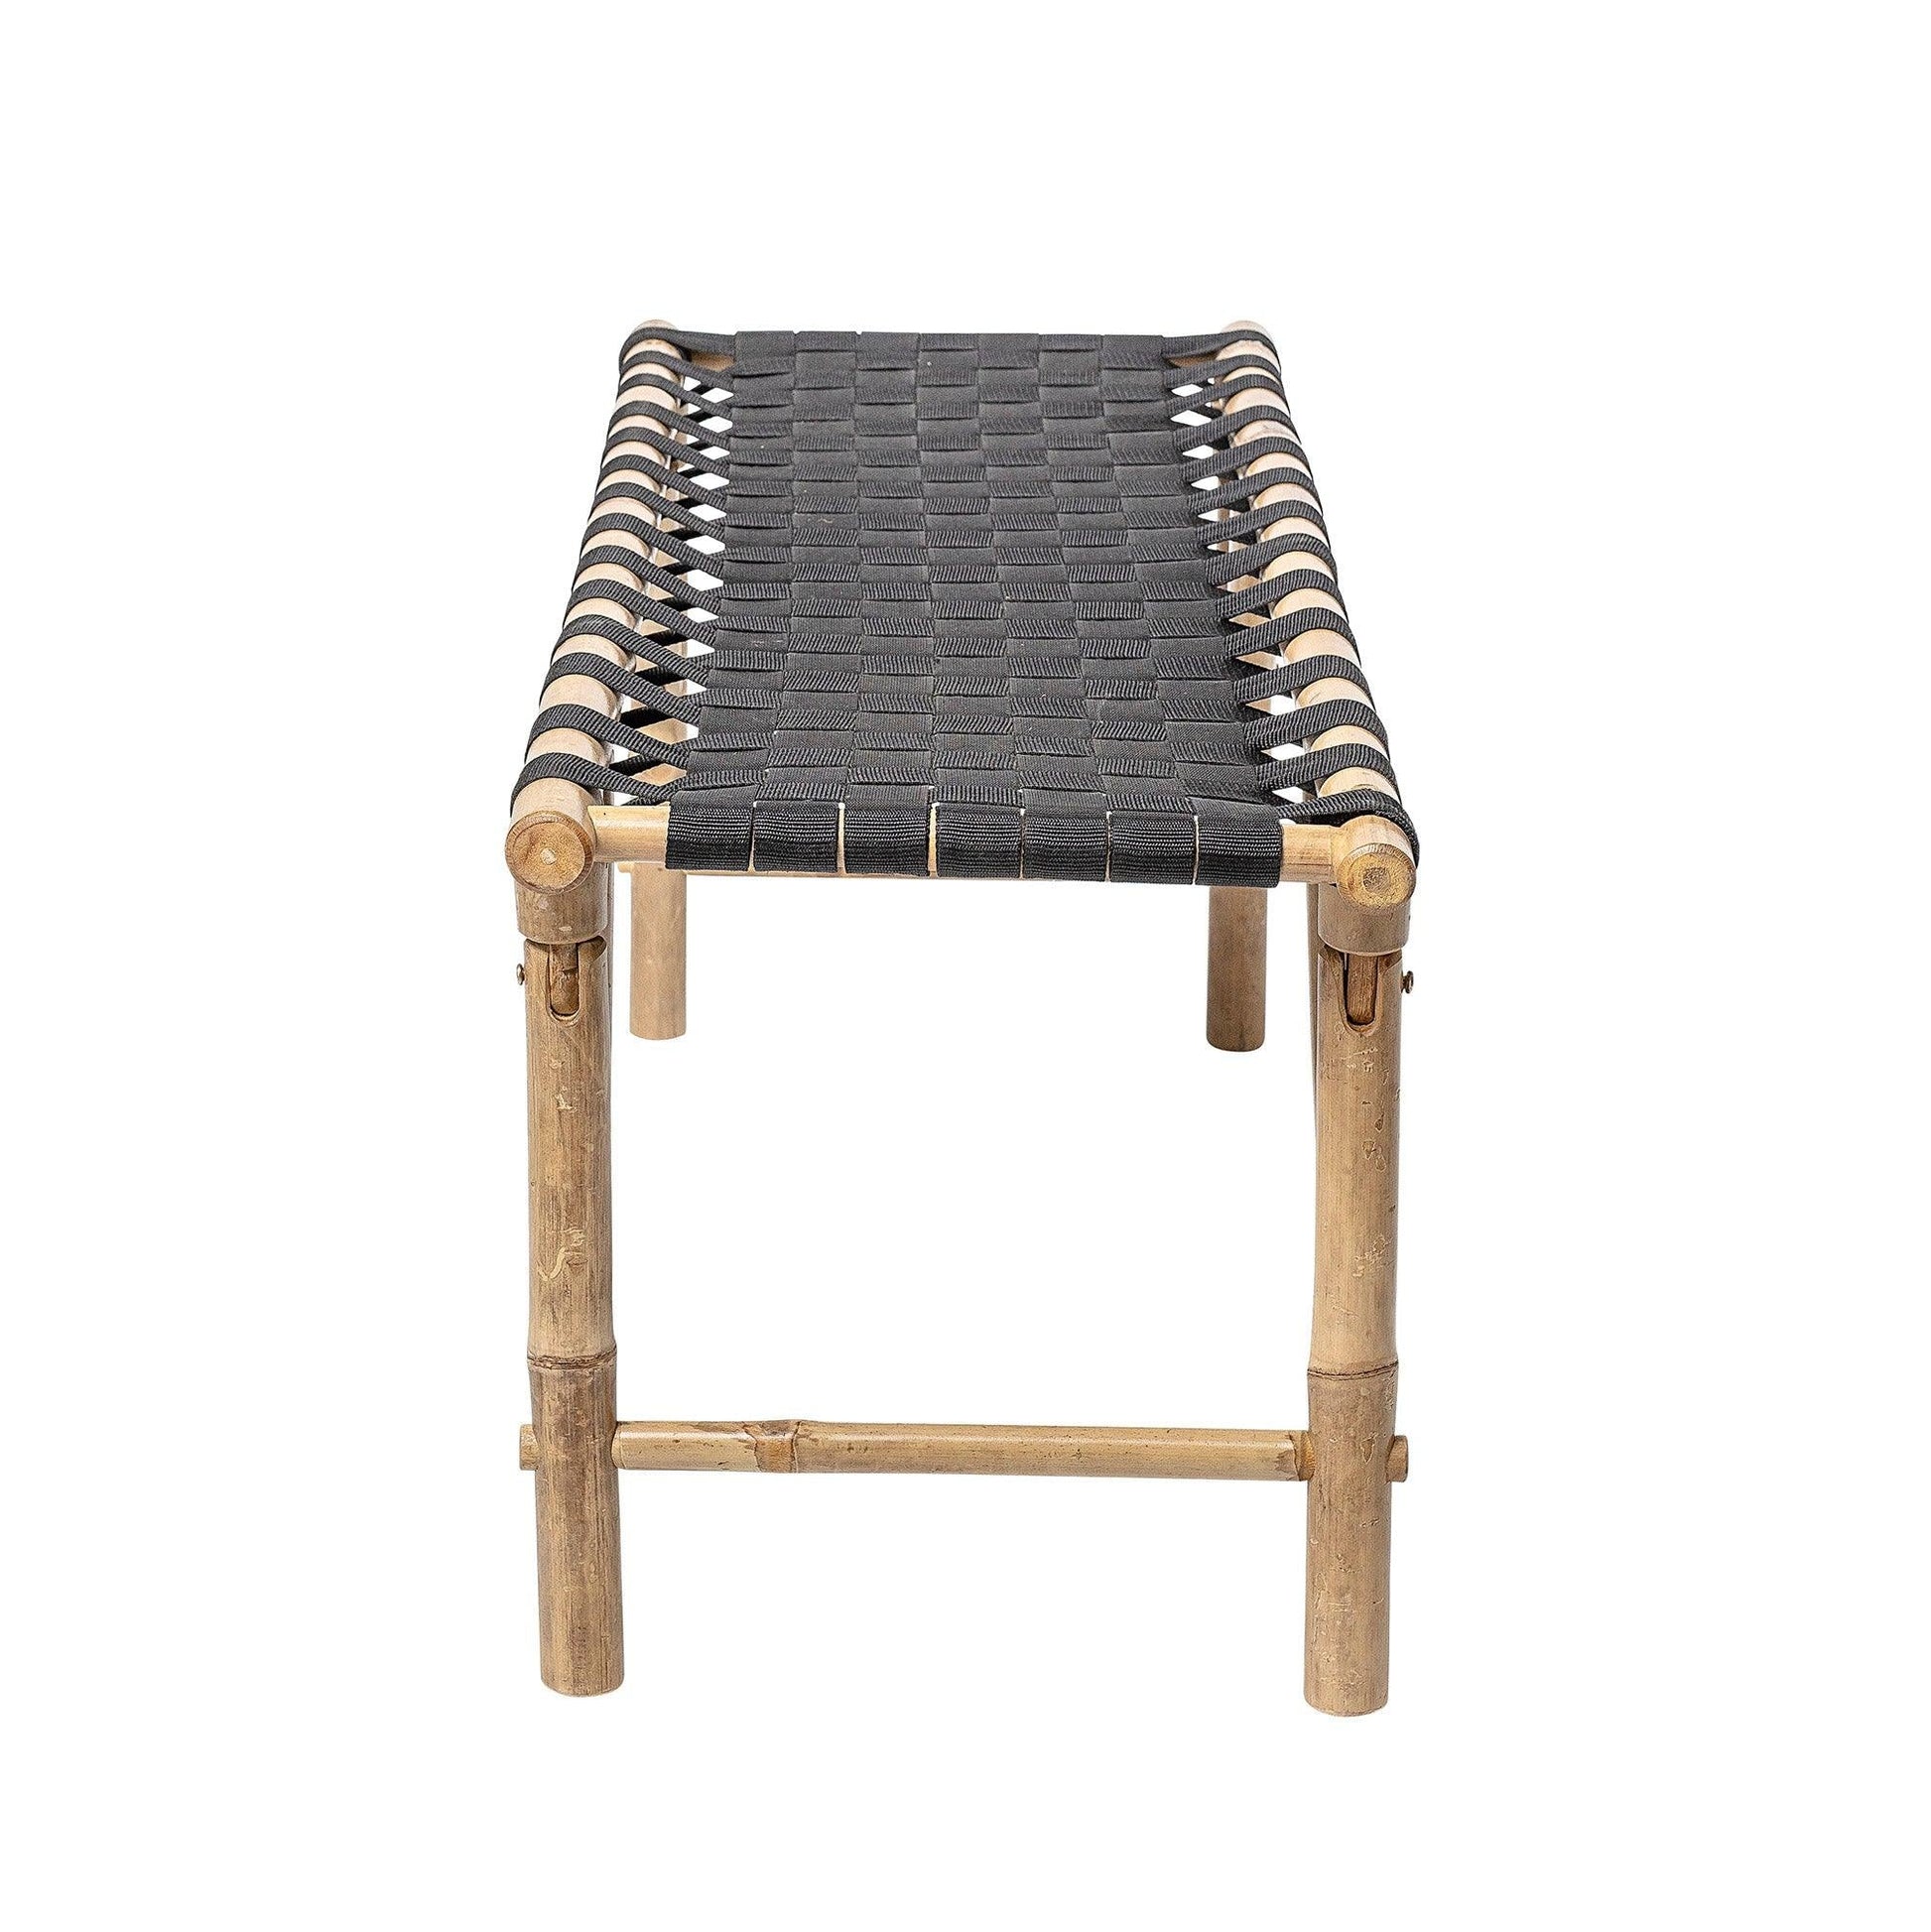 Foldable Bamboo Bench